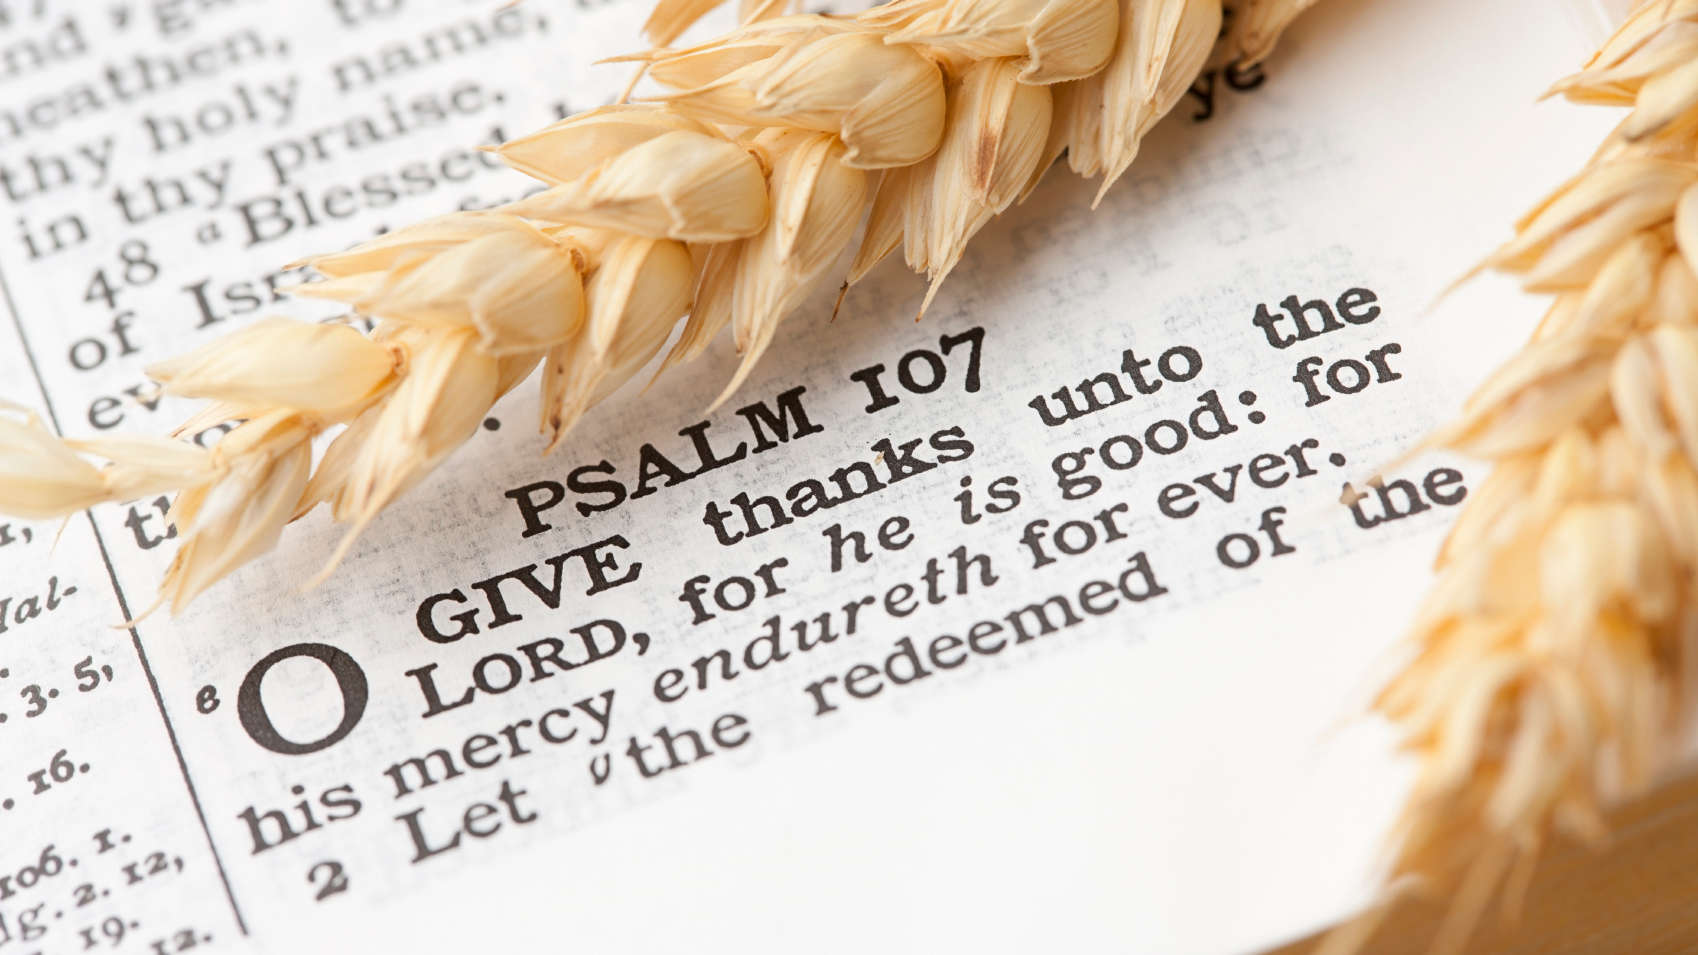 With Thanksgiving just around the corner, it's important to remember that God is good, and He is our refuge - even amid the most devastating of situations. Here are ten verses - in no particular order - that can help you express your gratitude to God for His protection, grace and faithfulness.